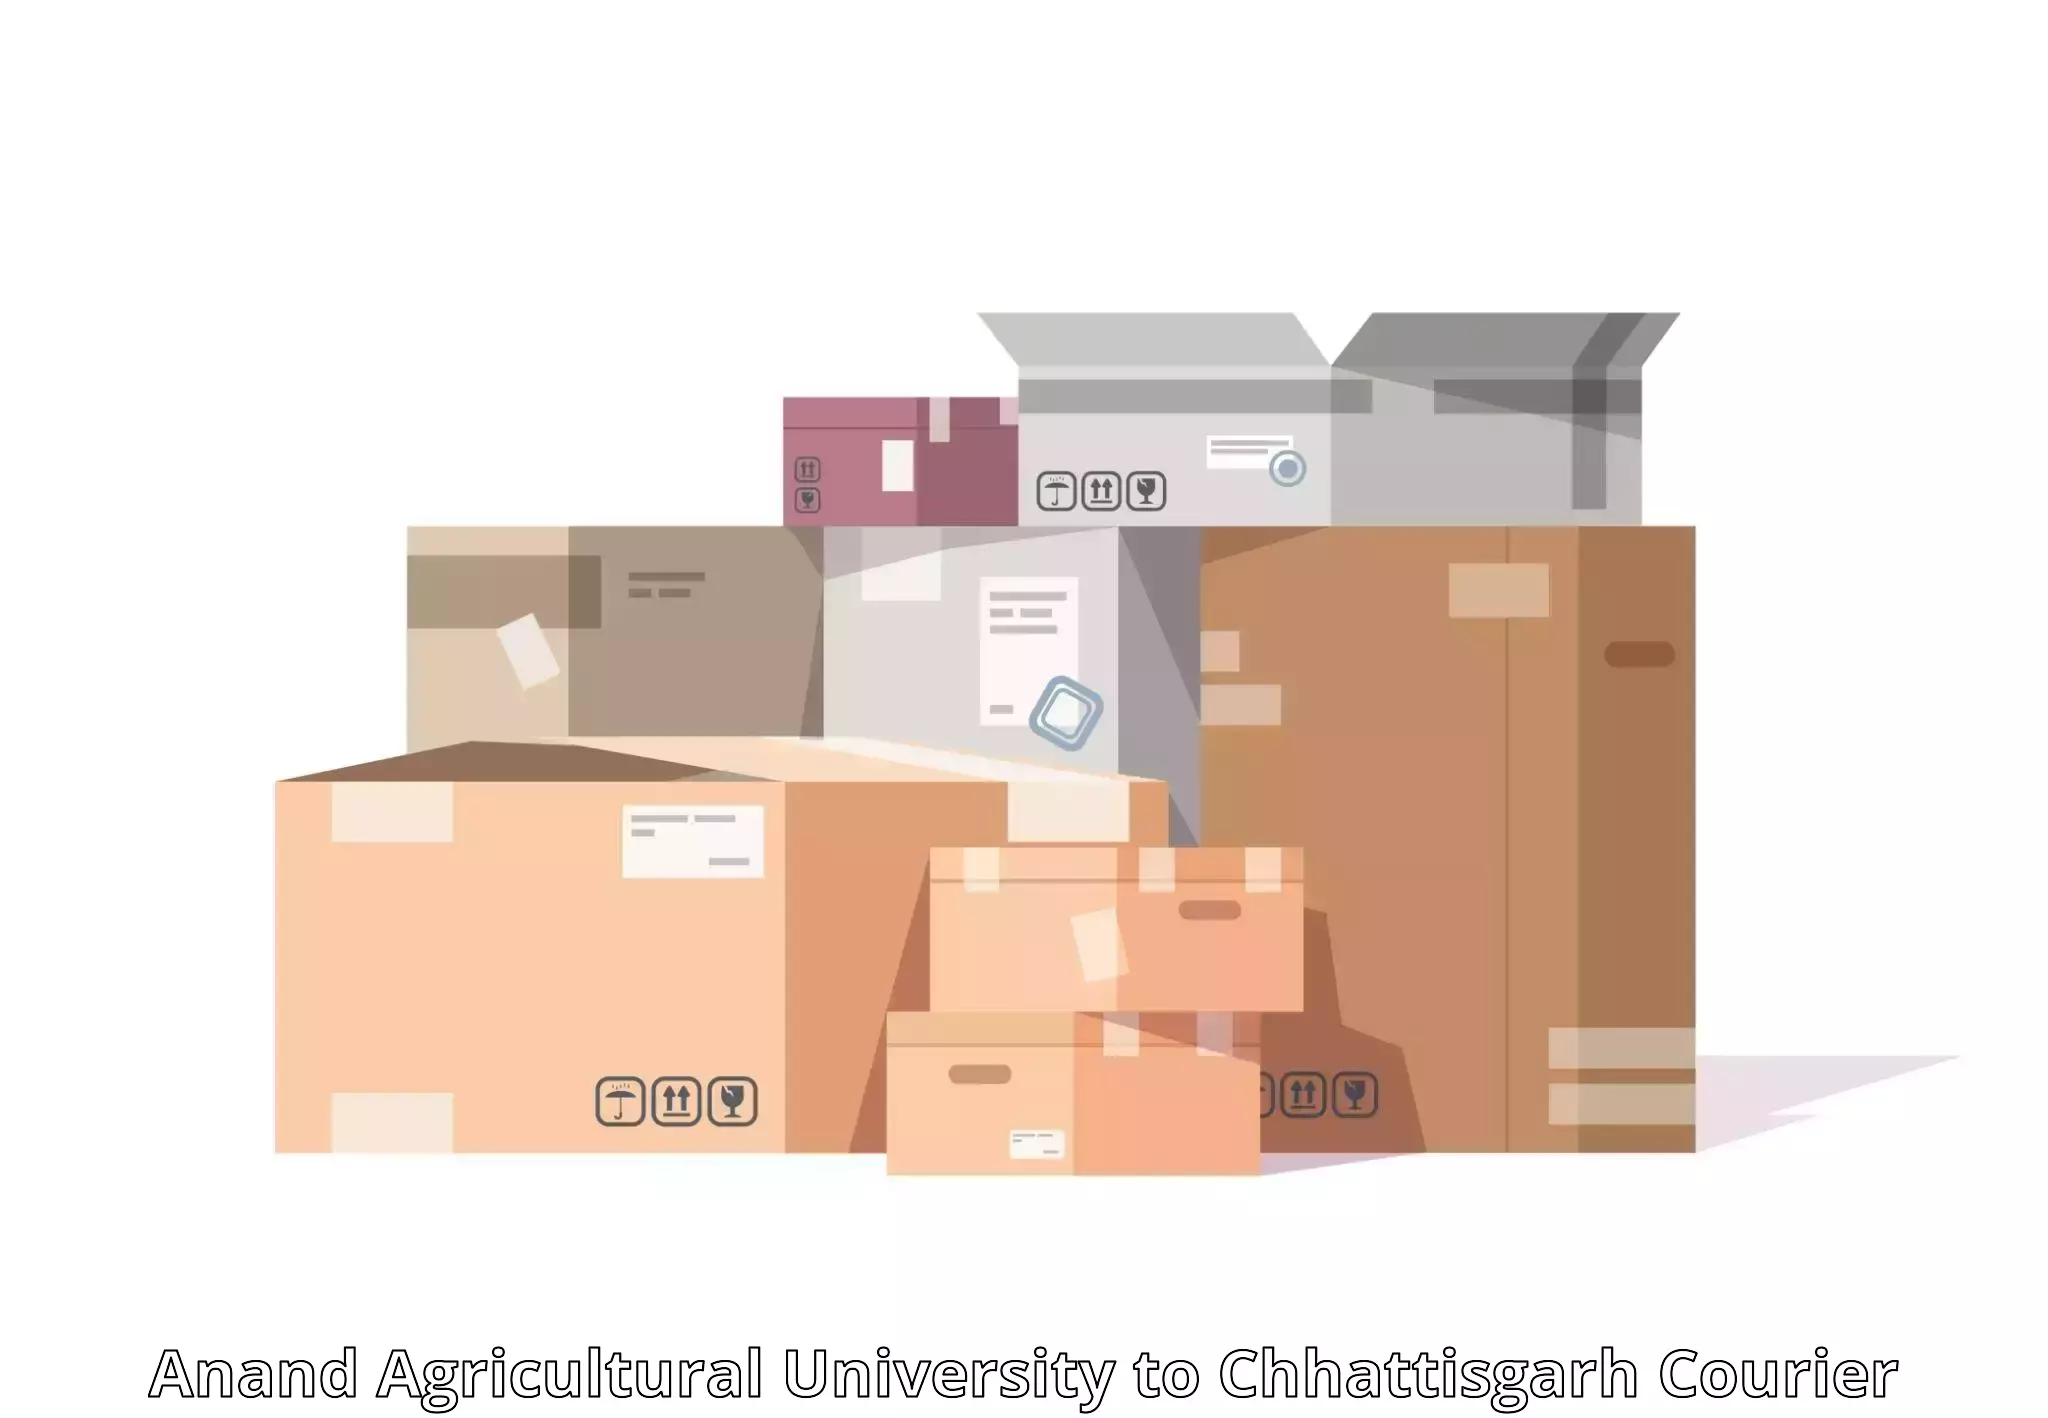 Package delivery network Anand Agricultural University to Shivrinarayan